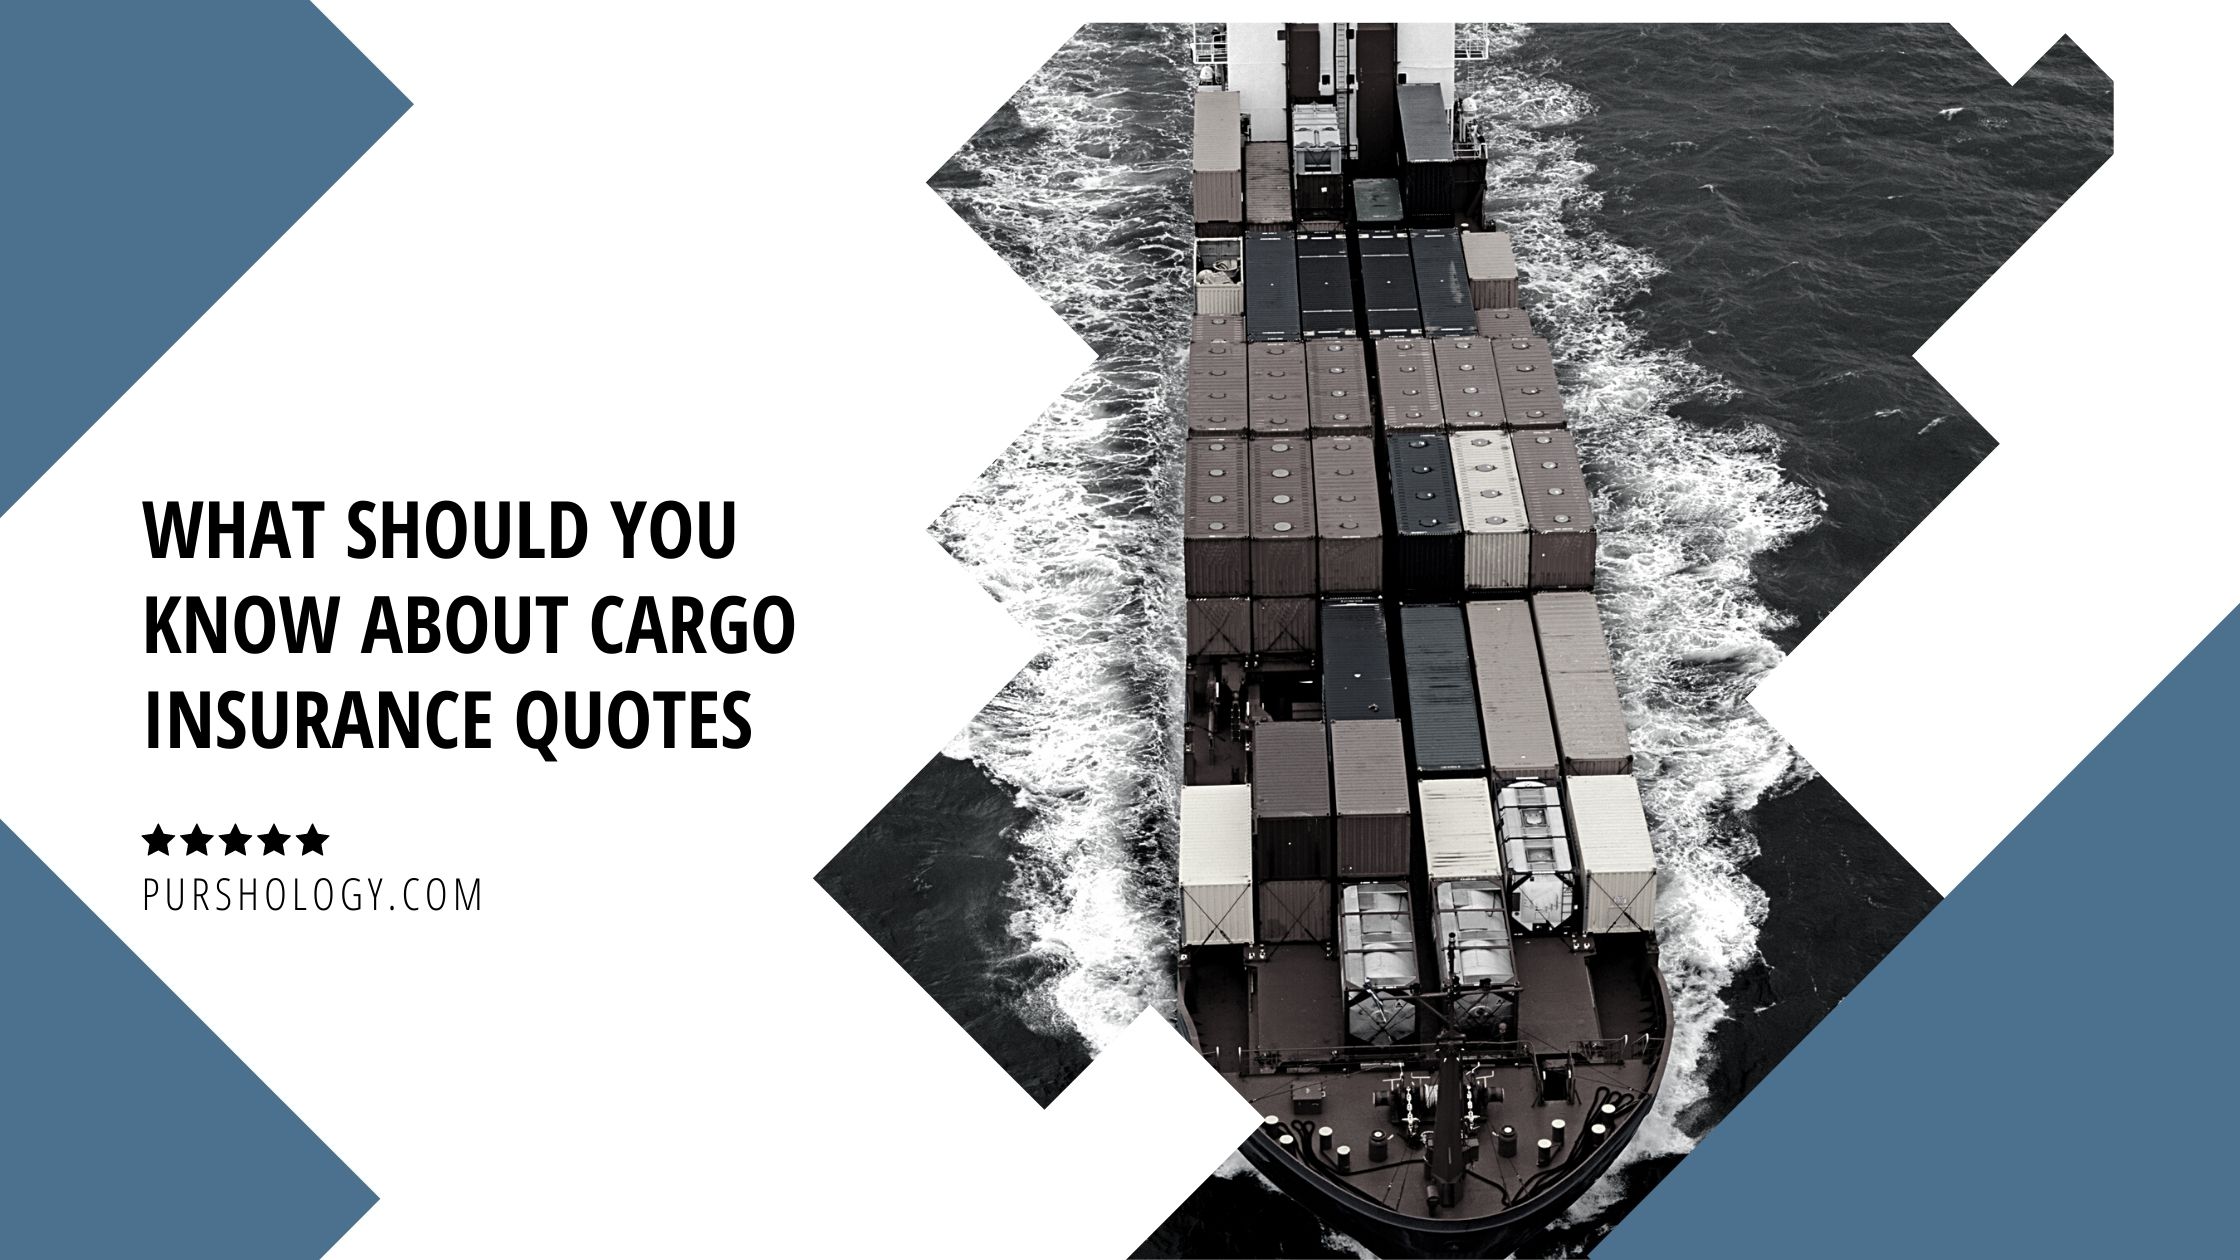 What Should you know About Cargo Insurance Quotes